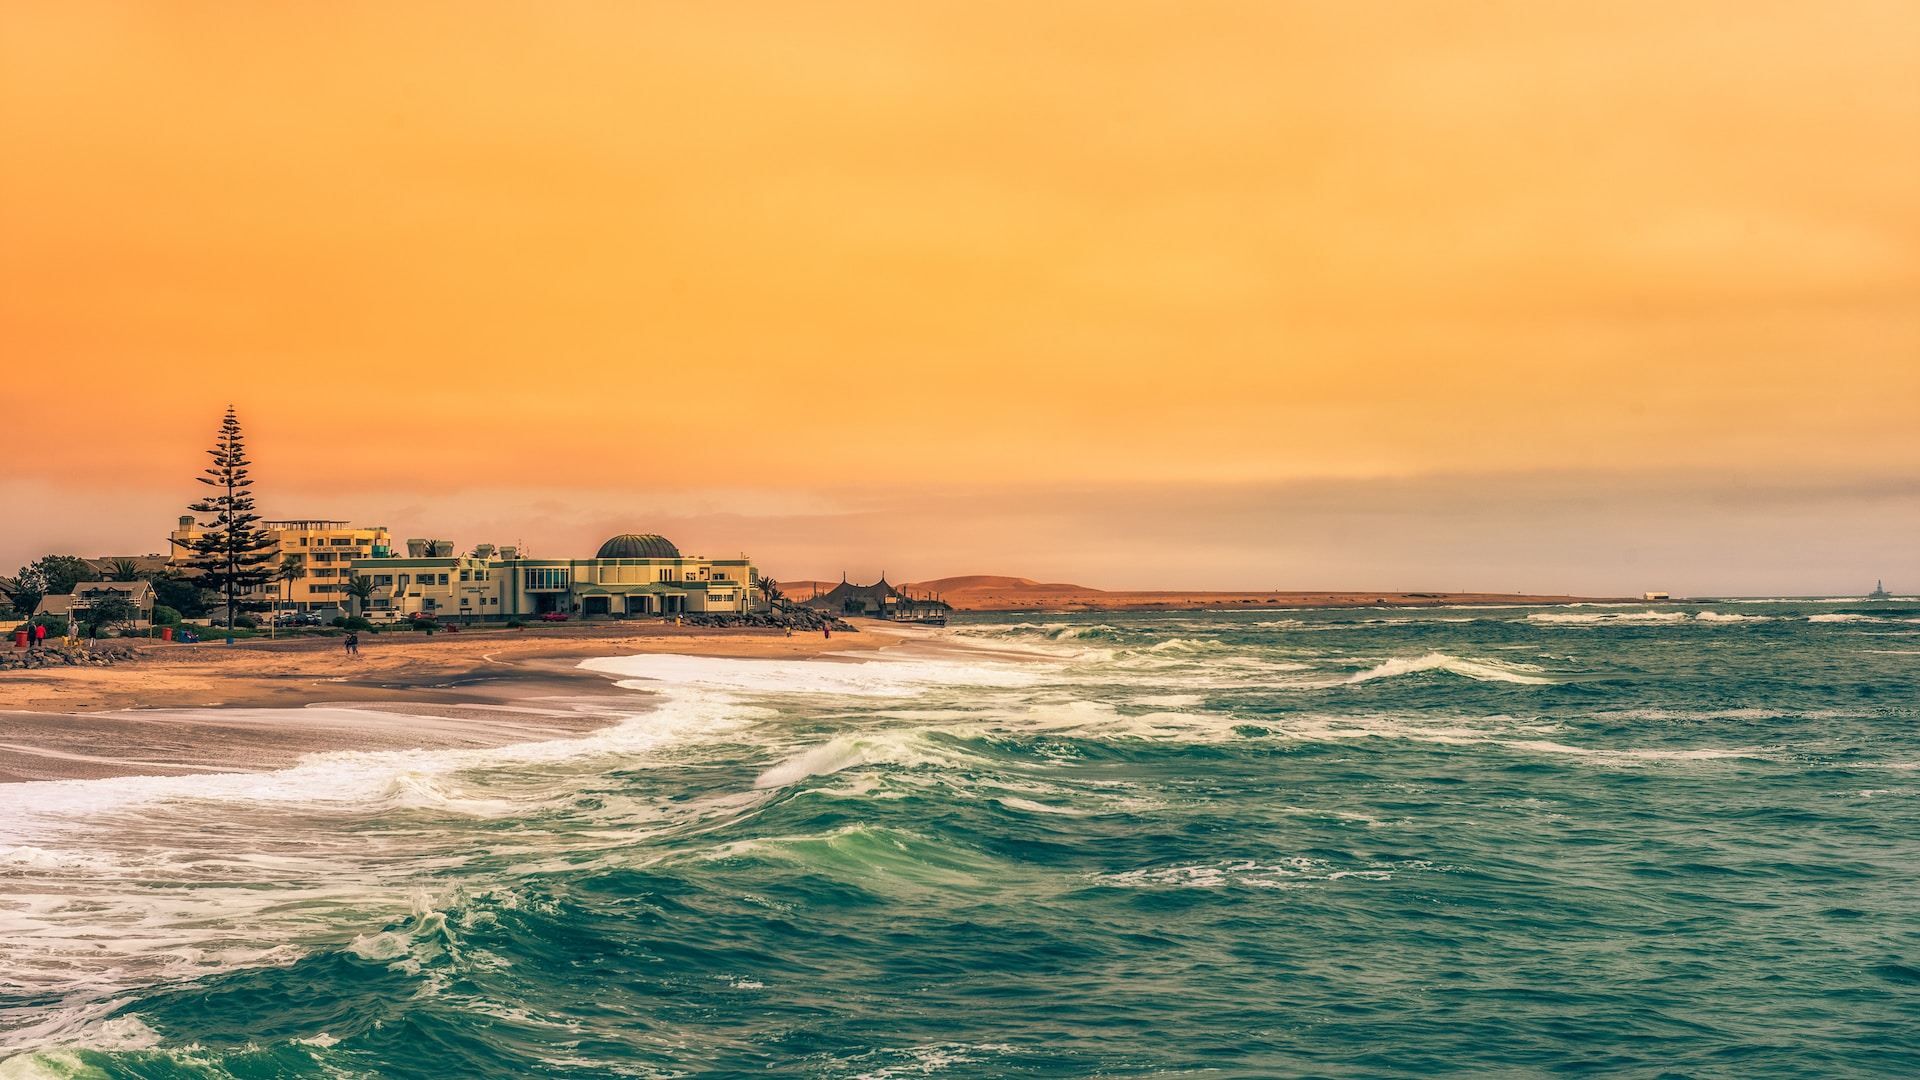 View of Swakopmund in the evening light with coastline and waves